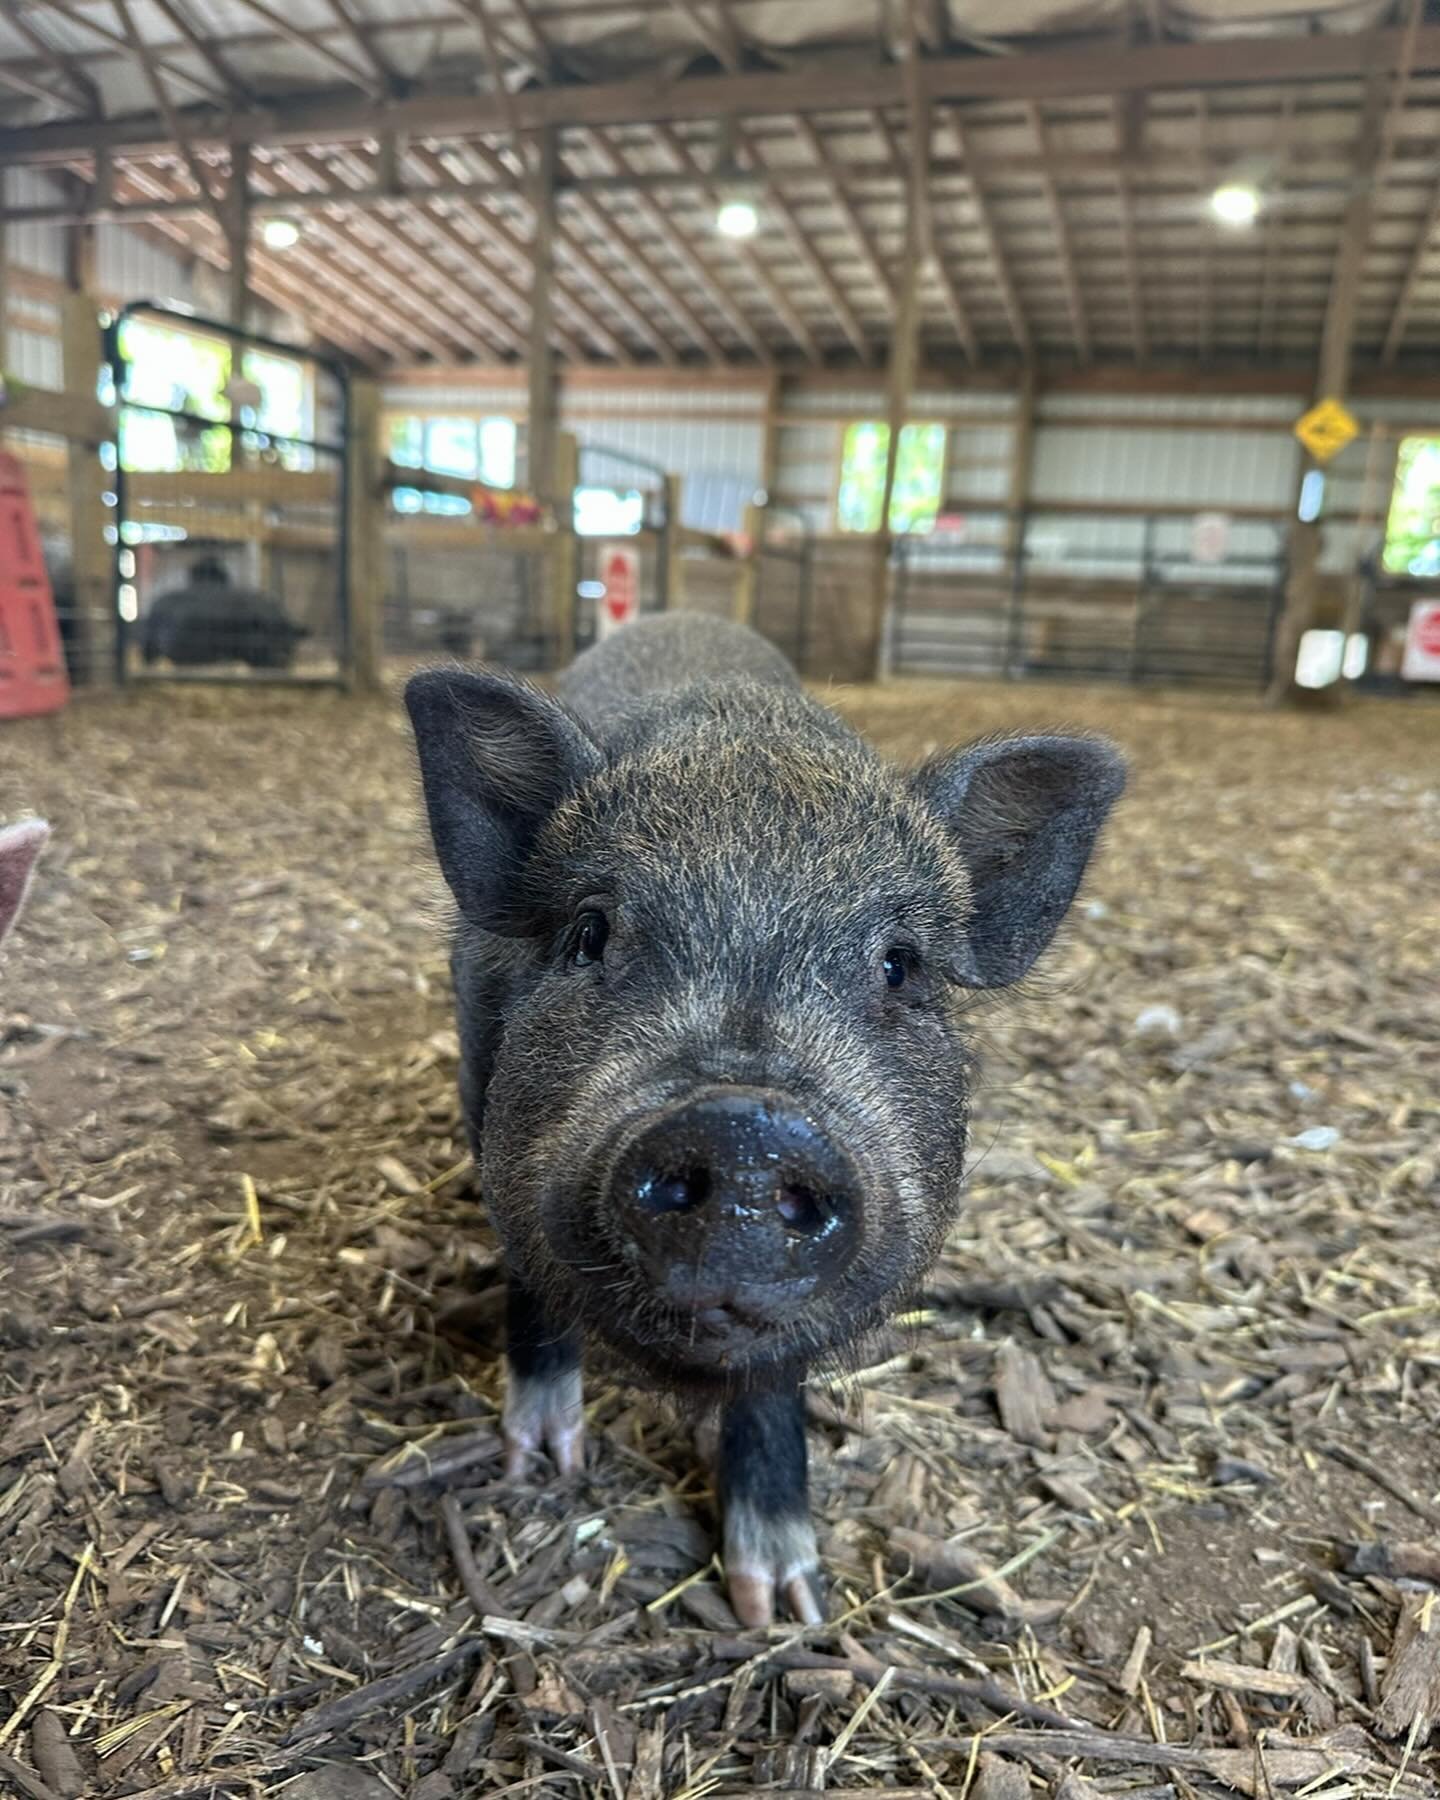 Meet Duke, a lovable five-month-old piglet with a soft bristle coat and an endearing gaze. Though small in size, his heart is vast, filled with an abundance of sweetness. Having had a rough start in life, Duke was found alongside two other pigs in an